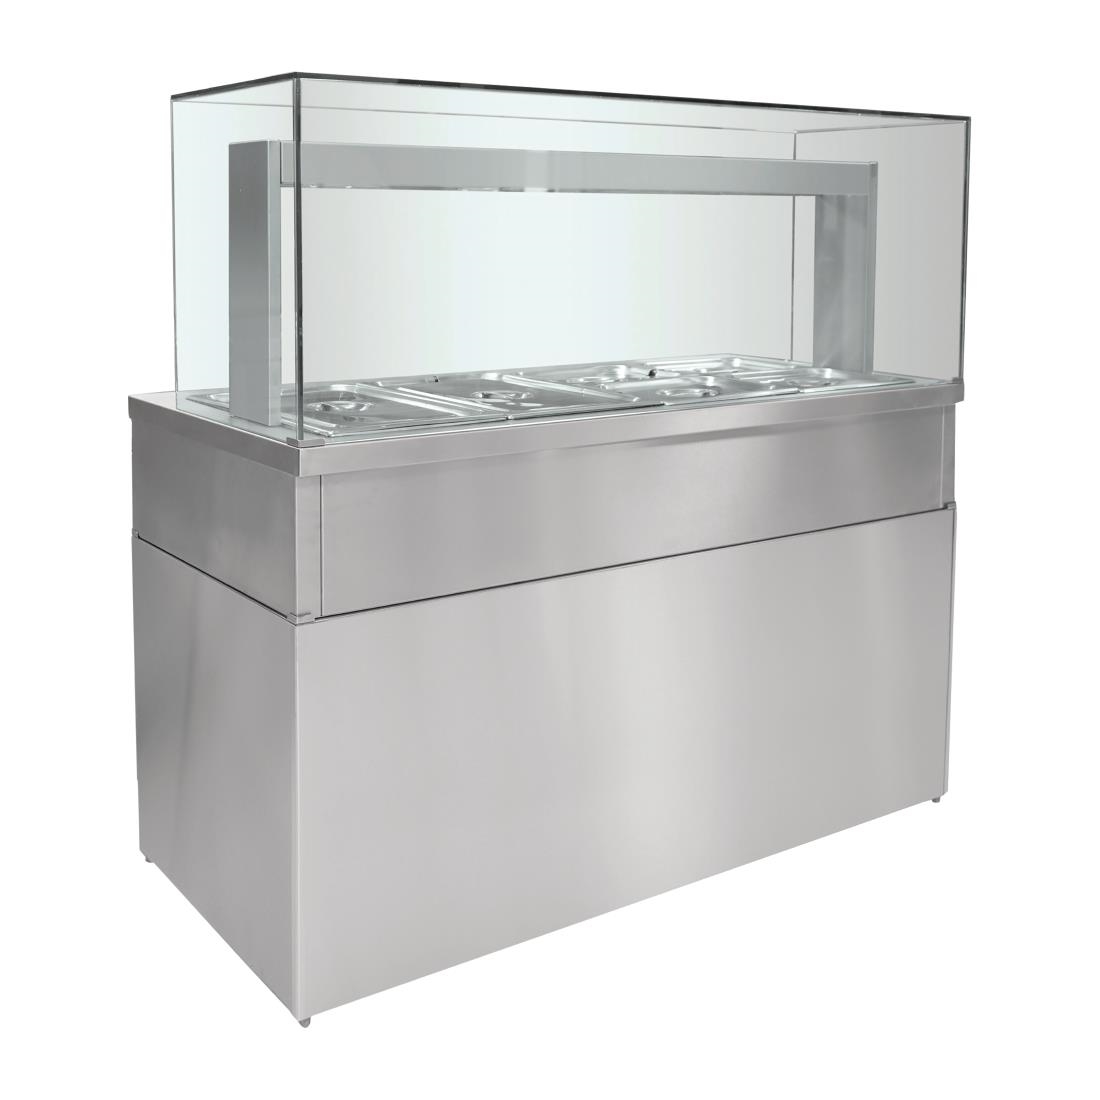 Parry Heated Bain Marie Servery Counter with Glass HGBM5